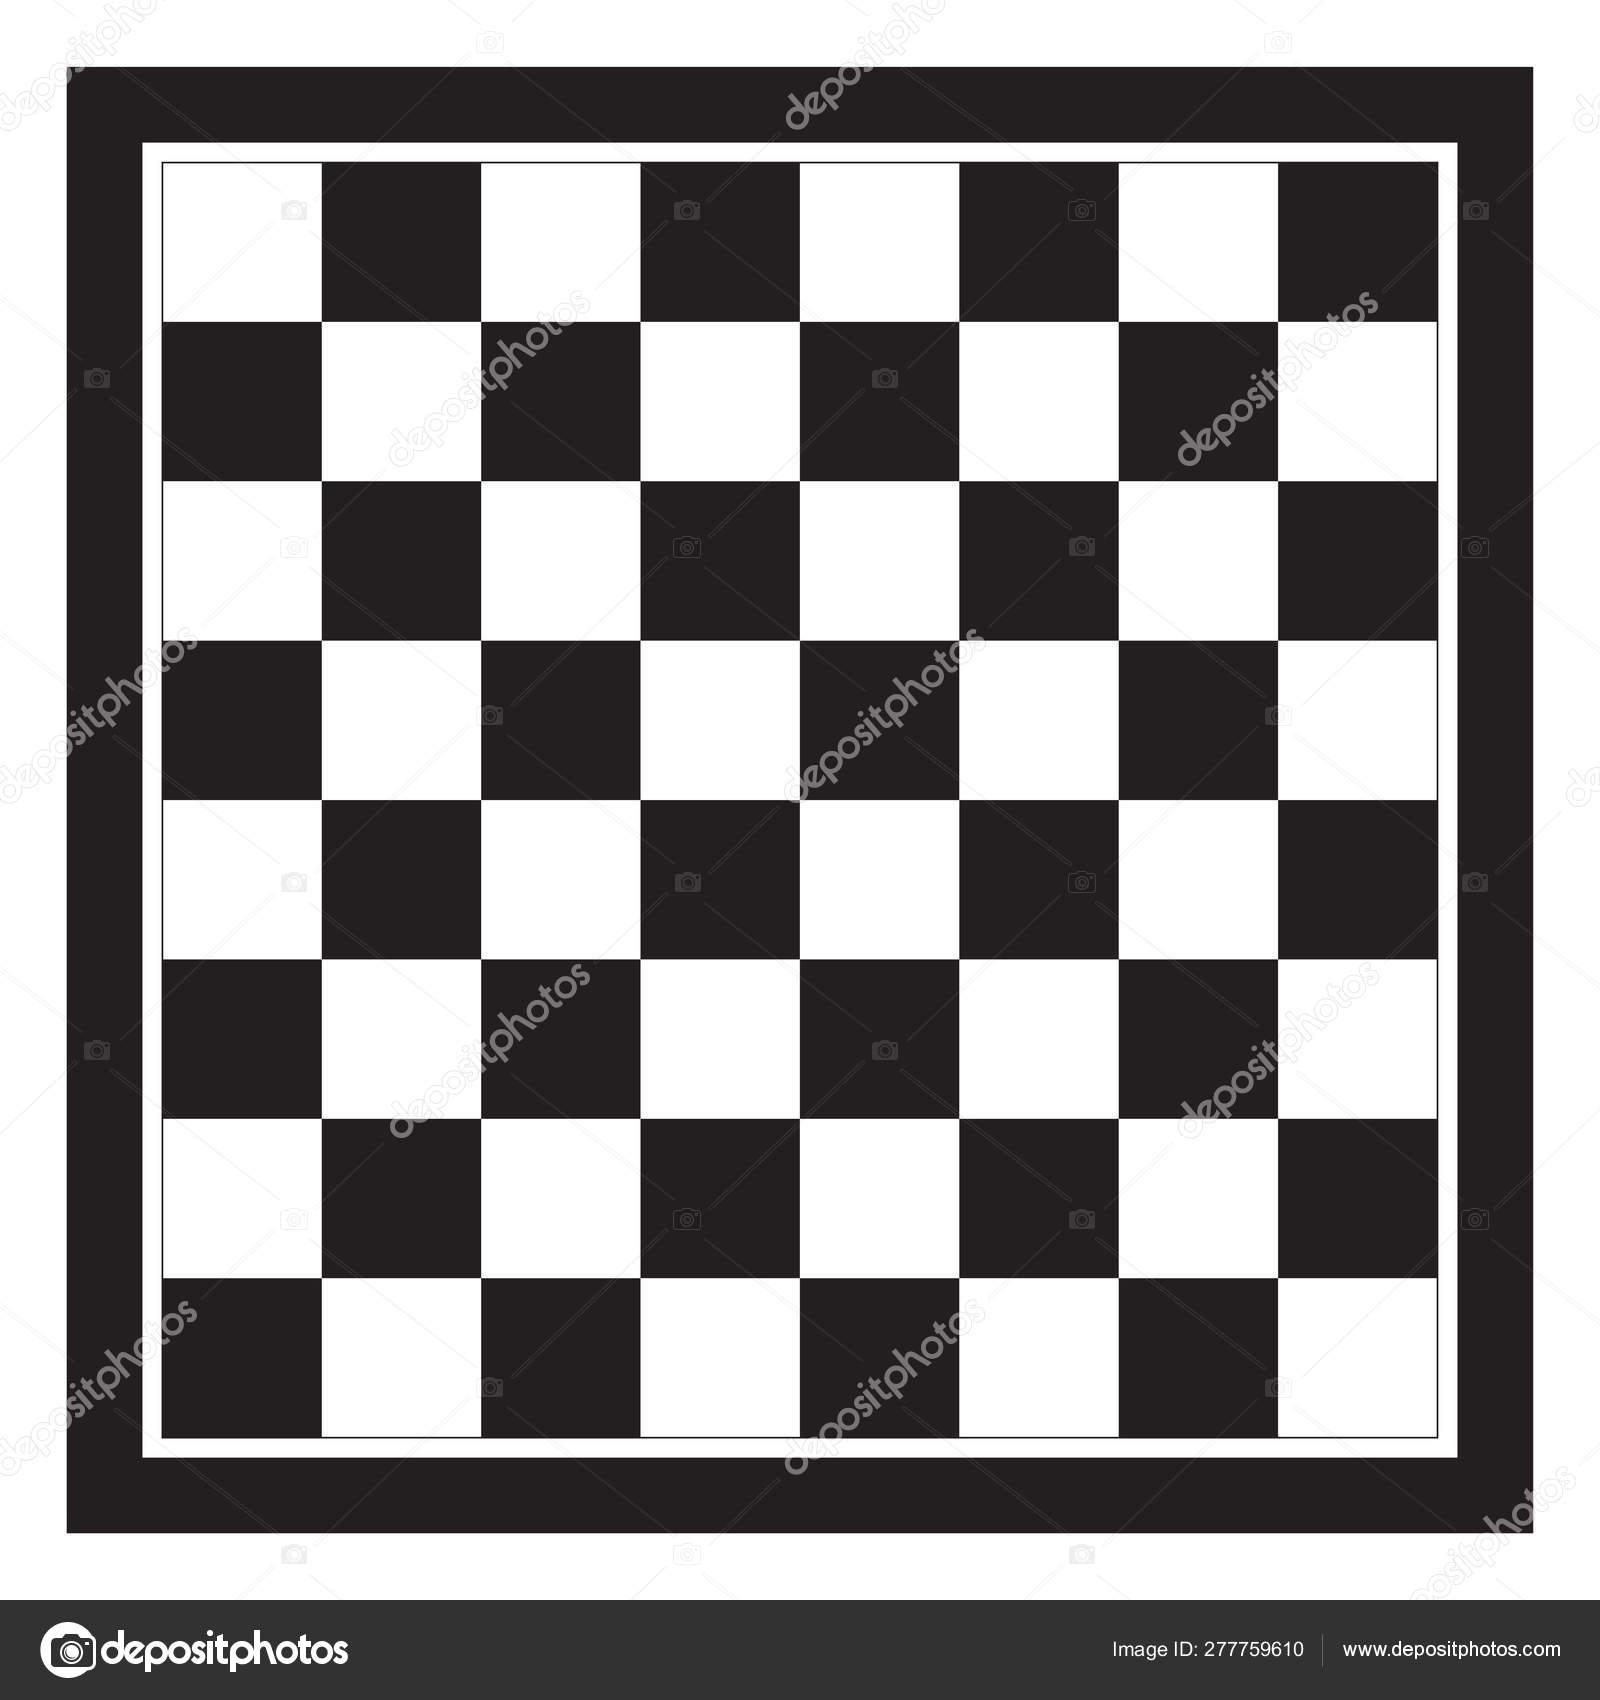 Chess board layout Royalty Free Vector Image - VectorStock